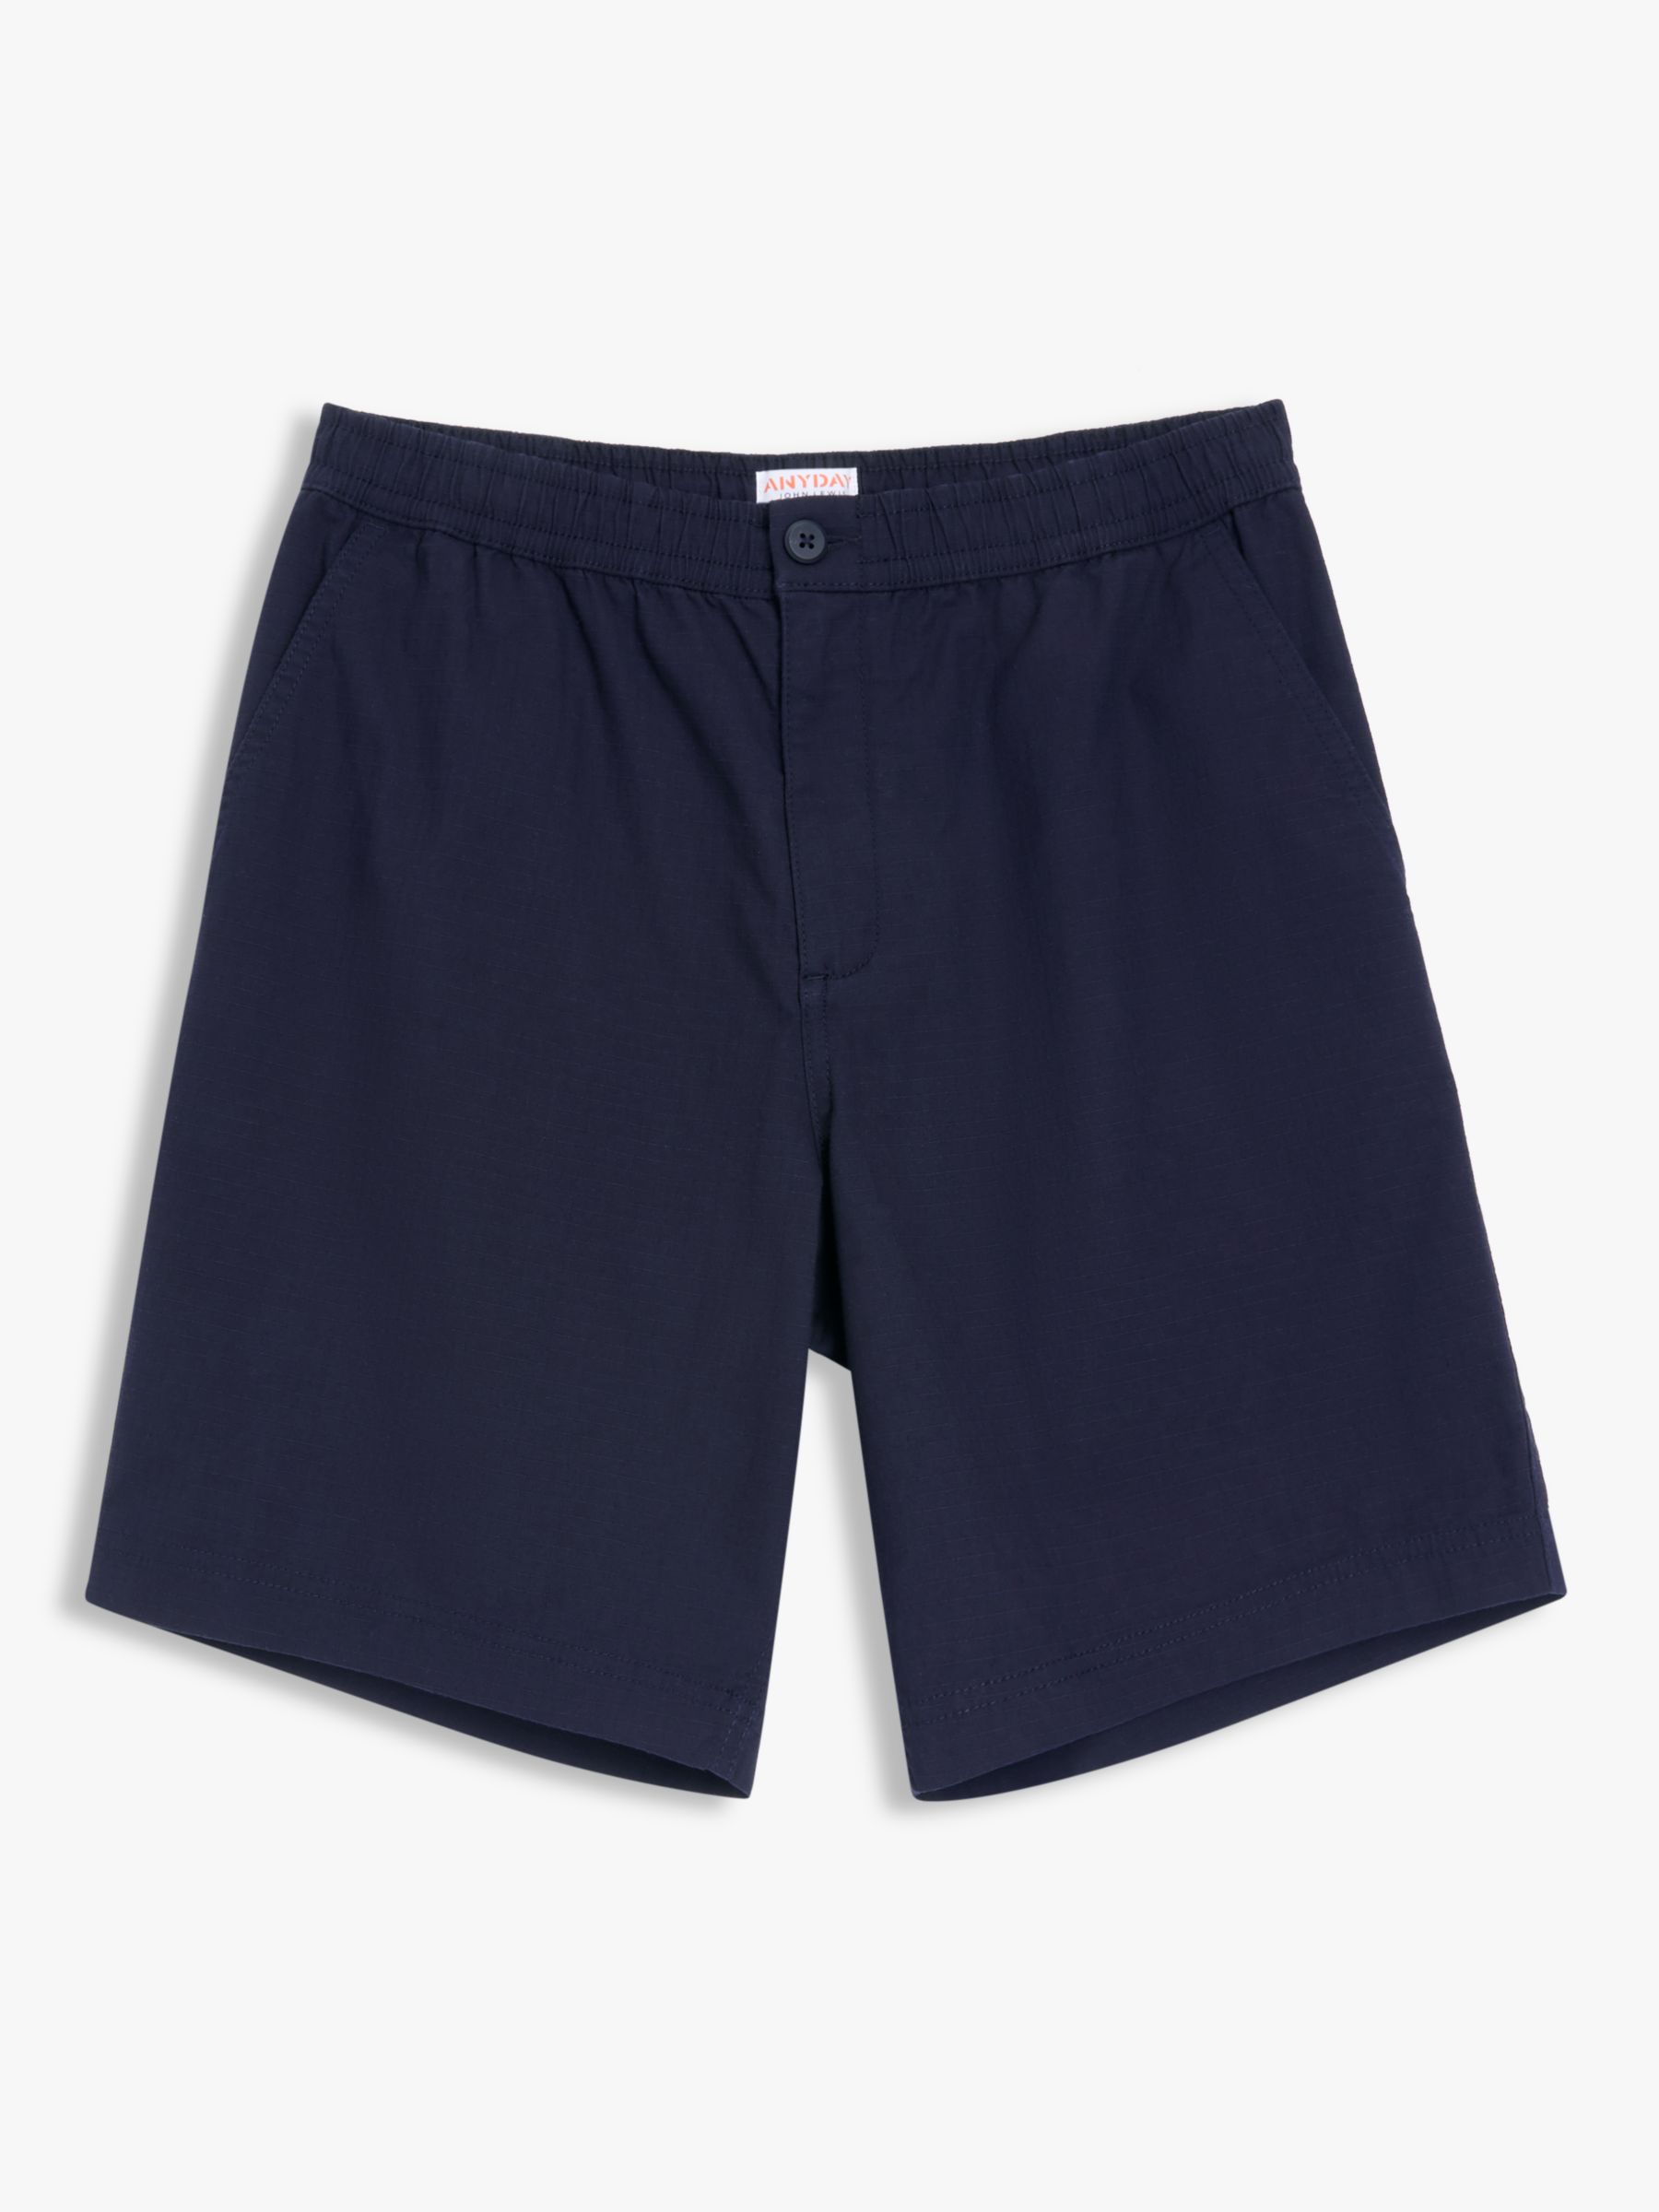 John Lewis ANYDAY Cotton Ripstop Shorts, Navy, S